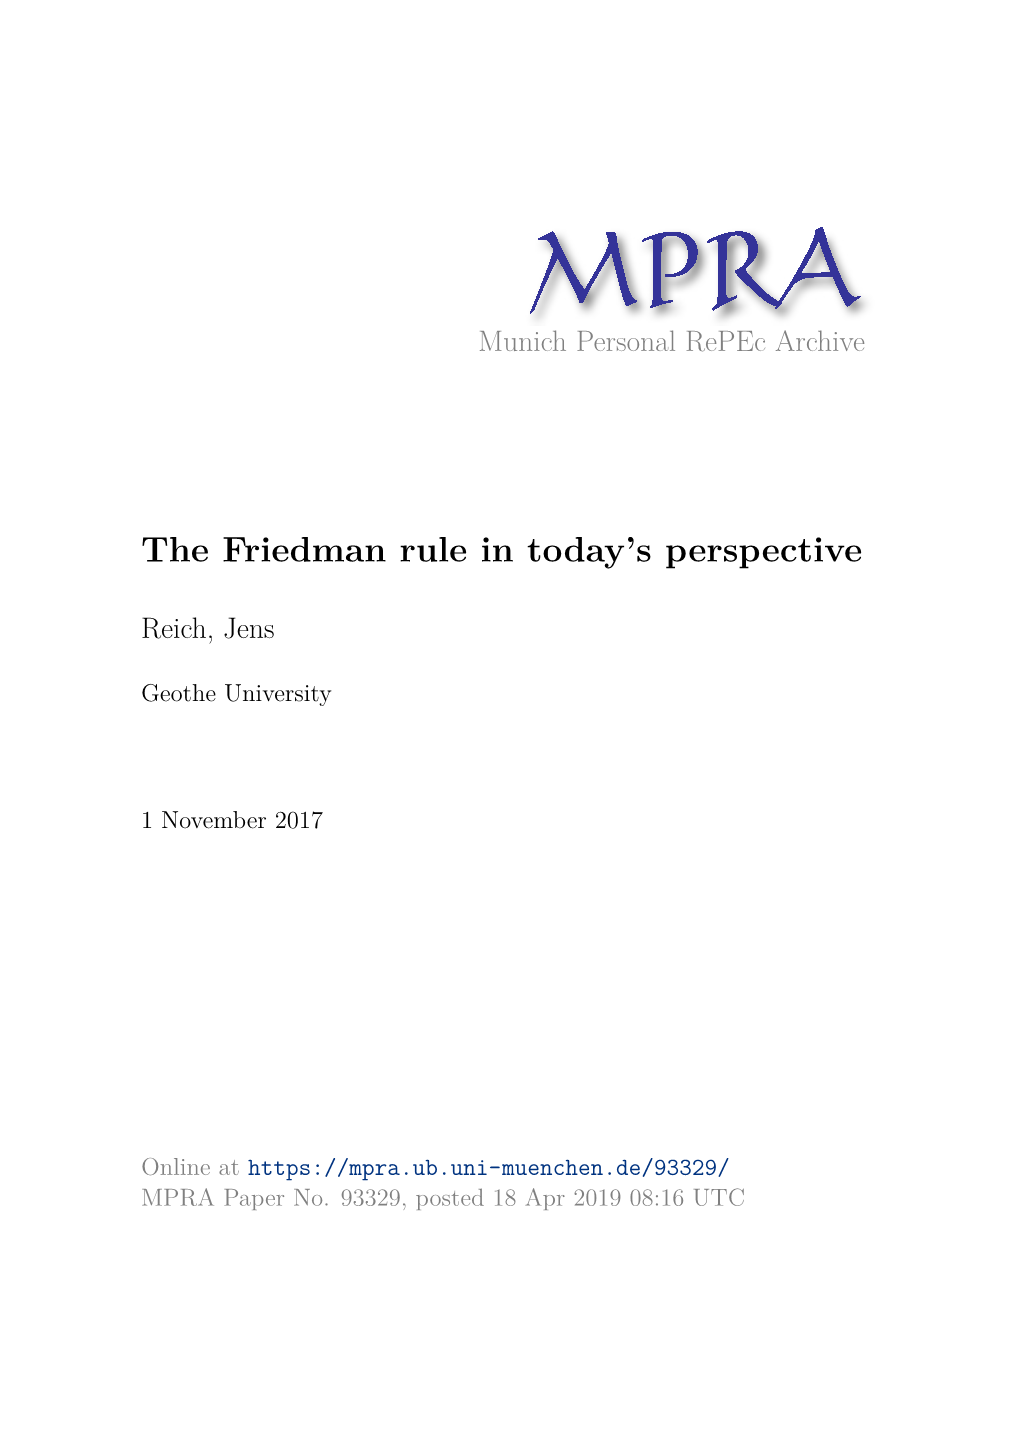 The Friedman Rule in Today's Perspective